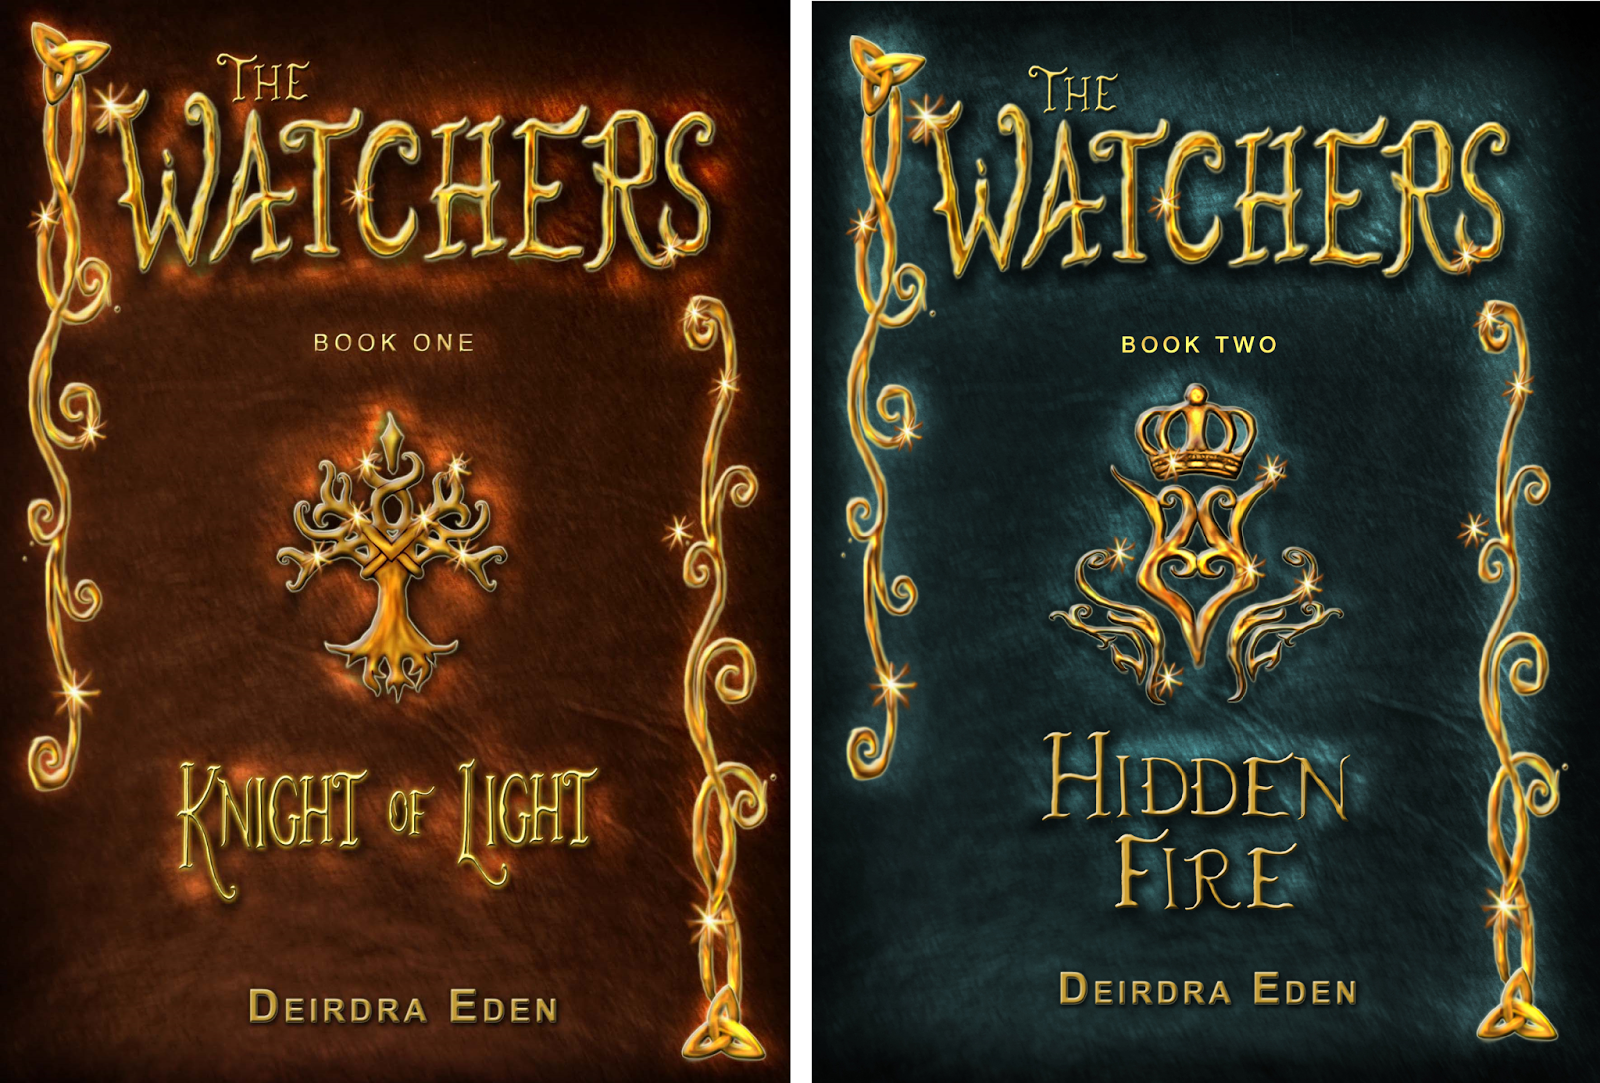 The Watchers Series Giveaway! House of Geekiness